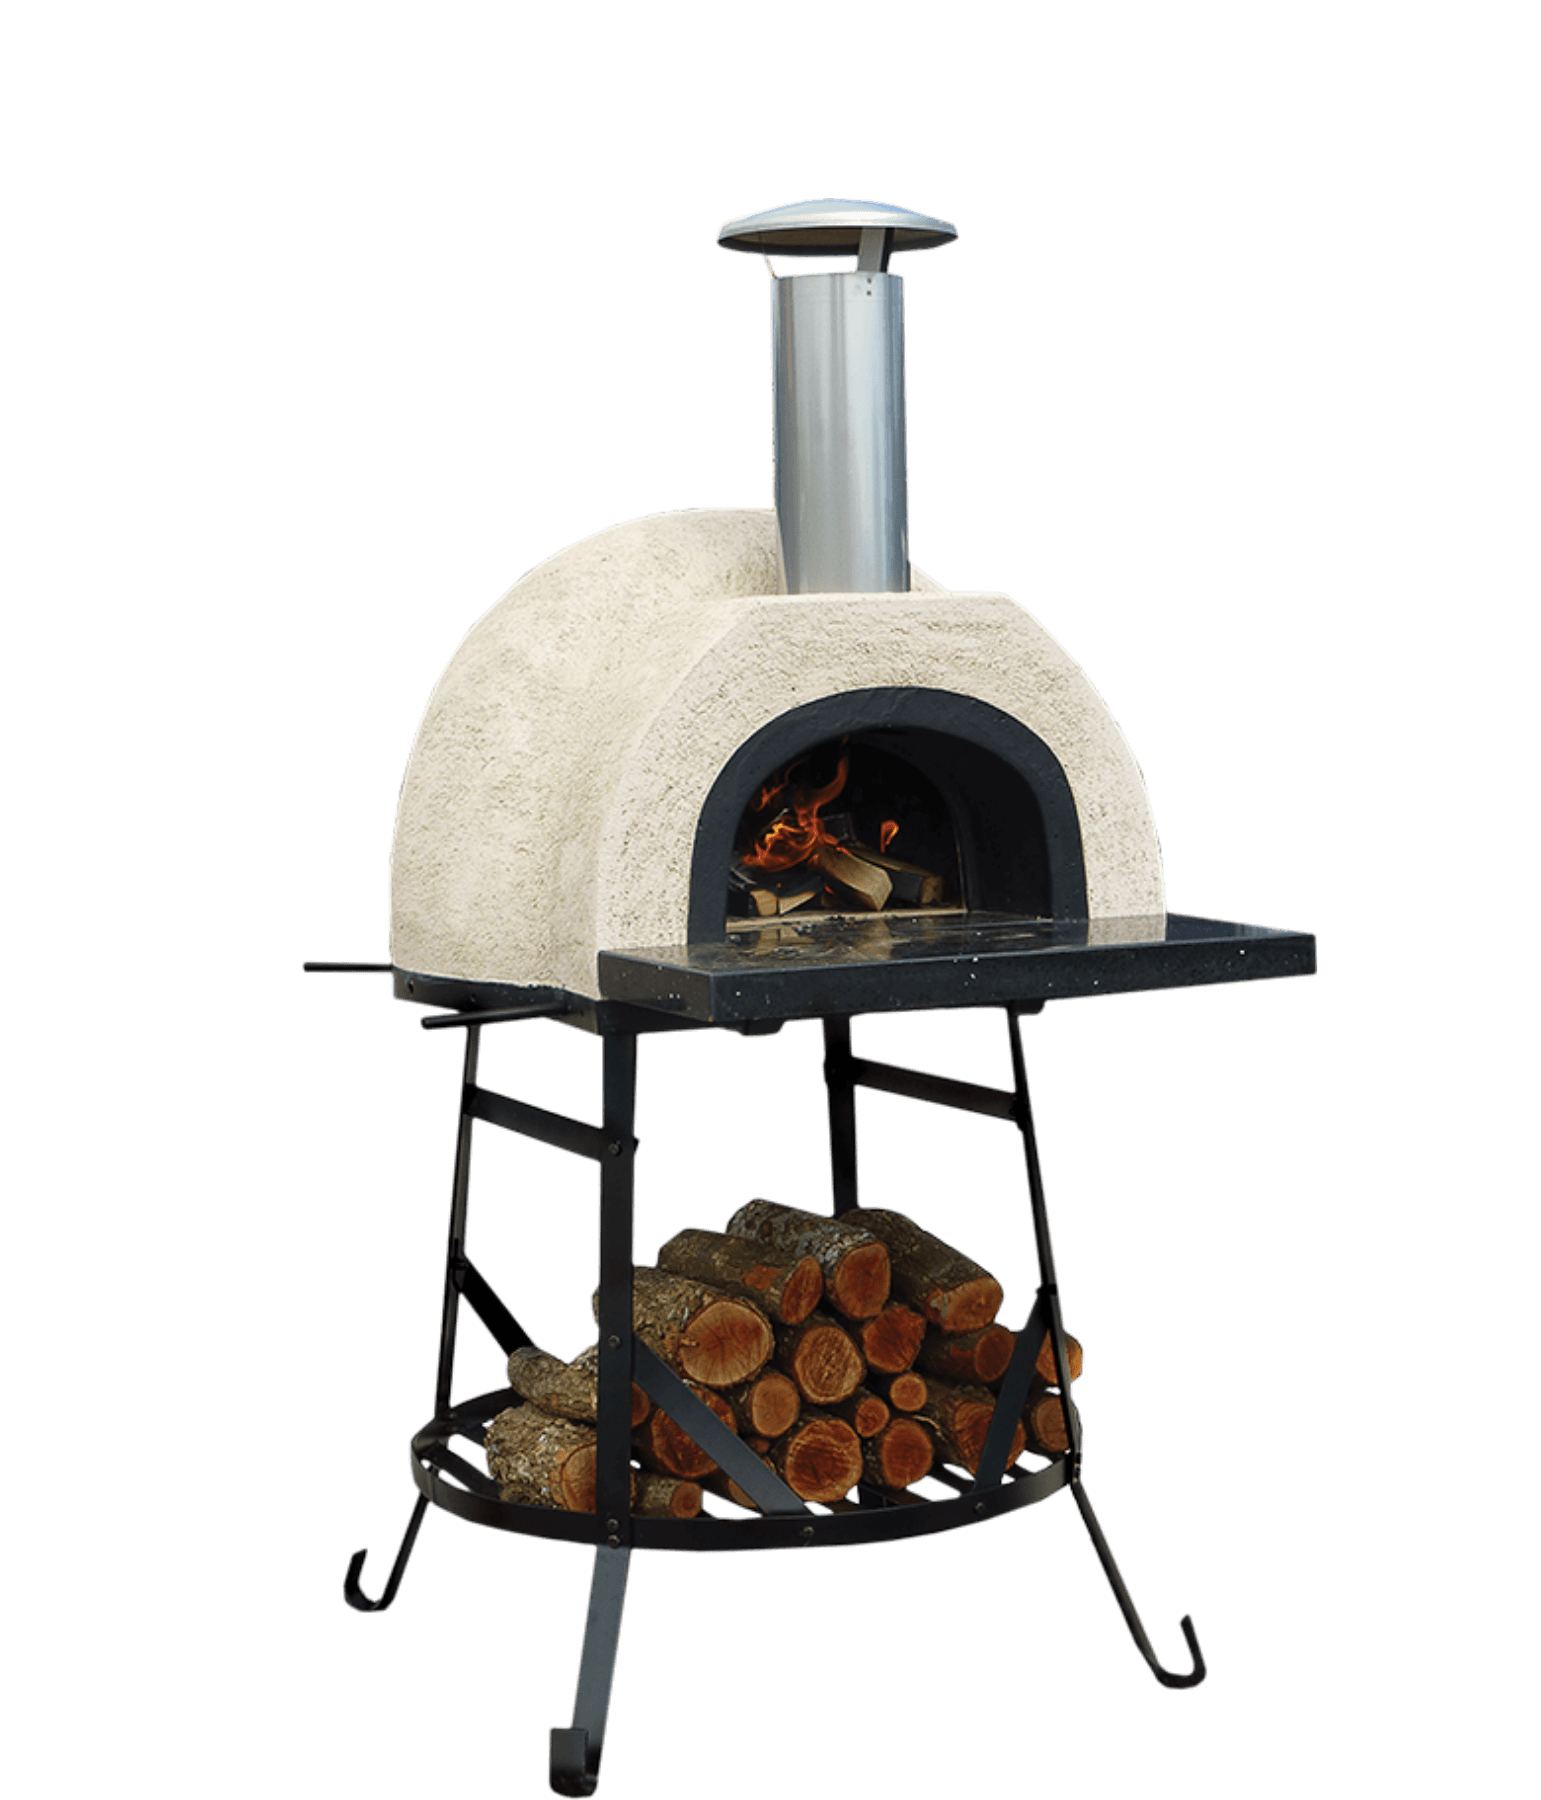 What's included? Pizza oven shell and base Granite bench Wrought iron stand Black steel door Pizza paddle Recipe book Specifications Dimensions - 590h x 870w x 870d  Weight - 270kg